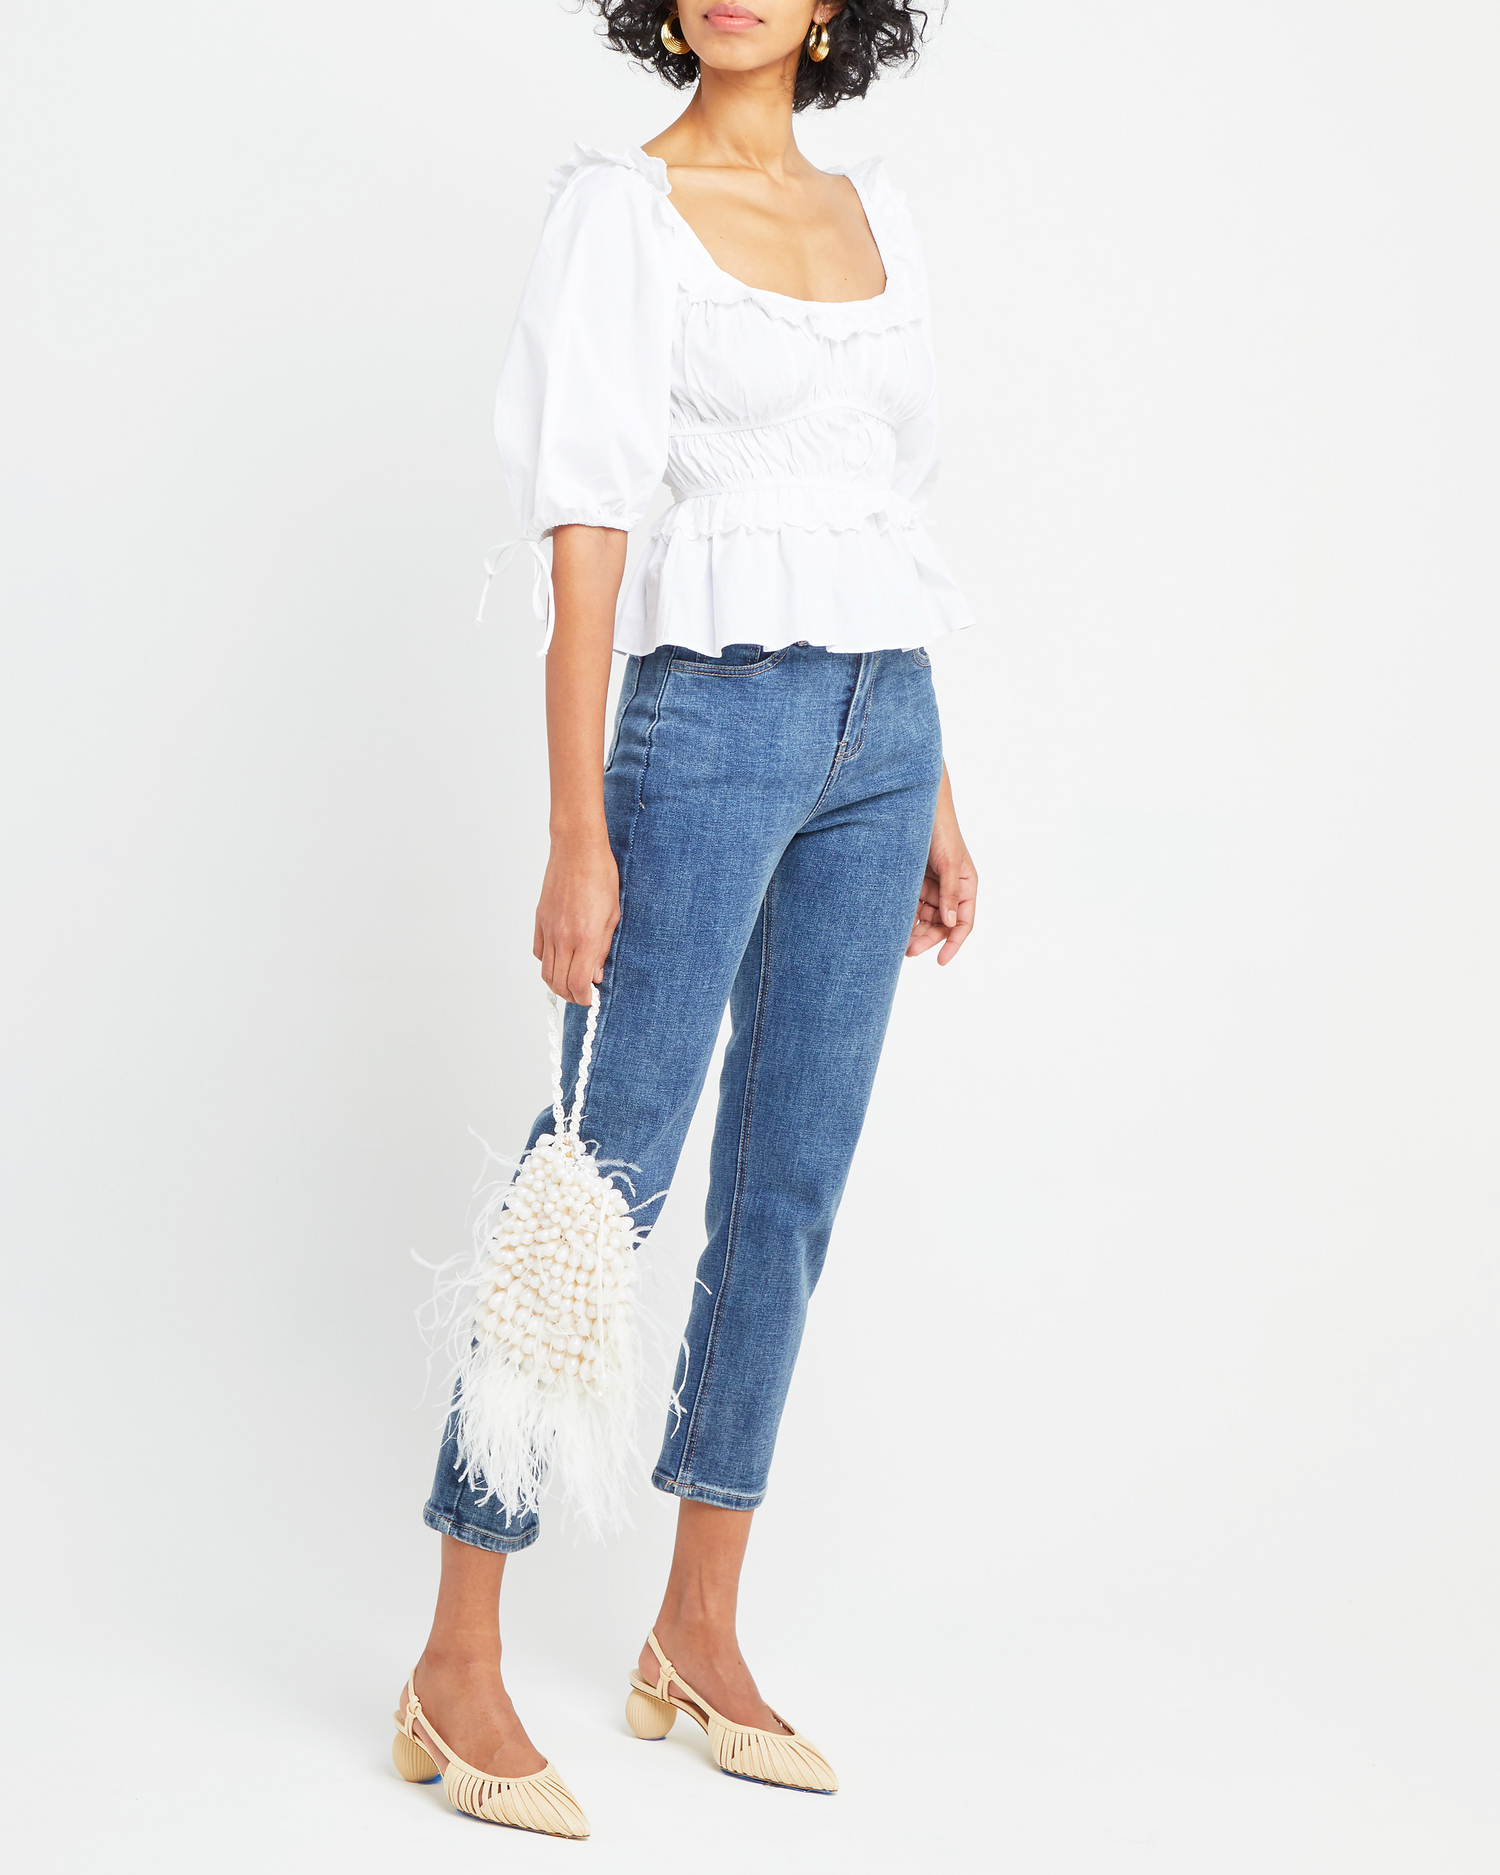 Fifth image of Snow Hill Top, a white puff sleeve top, lace and ruffle details, peplum-like hem